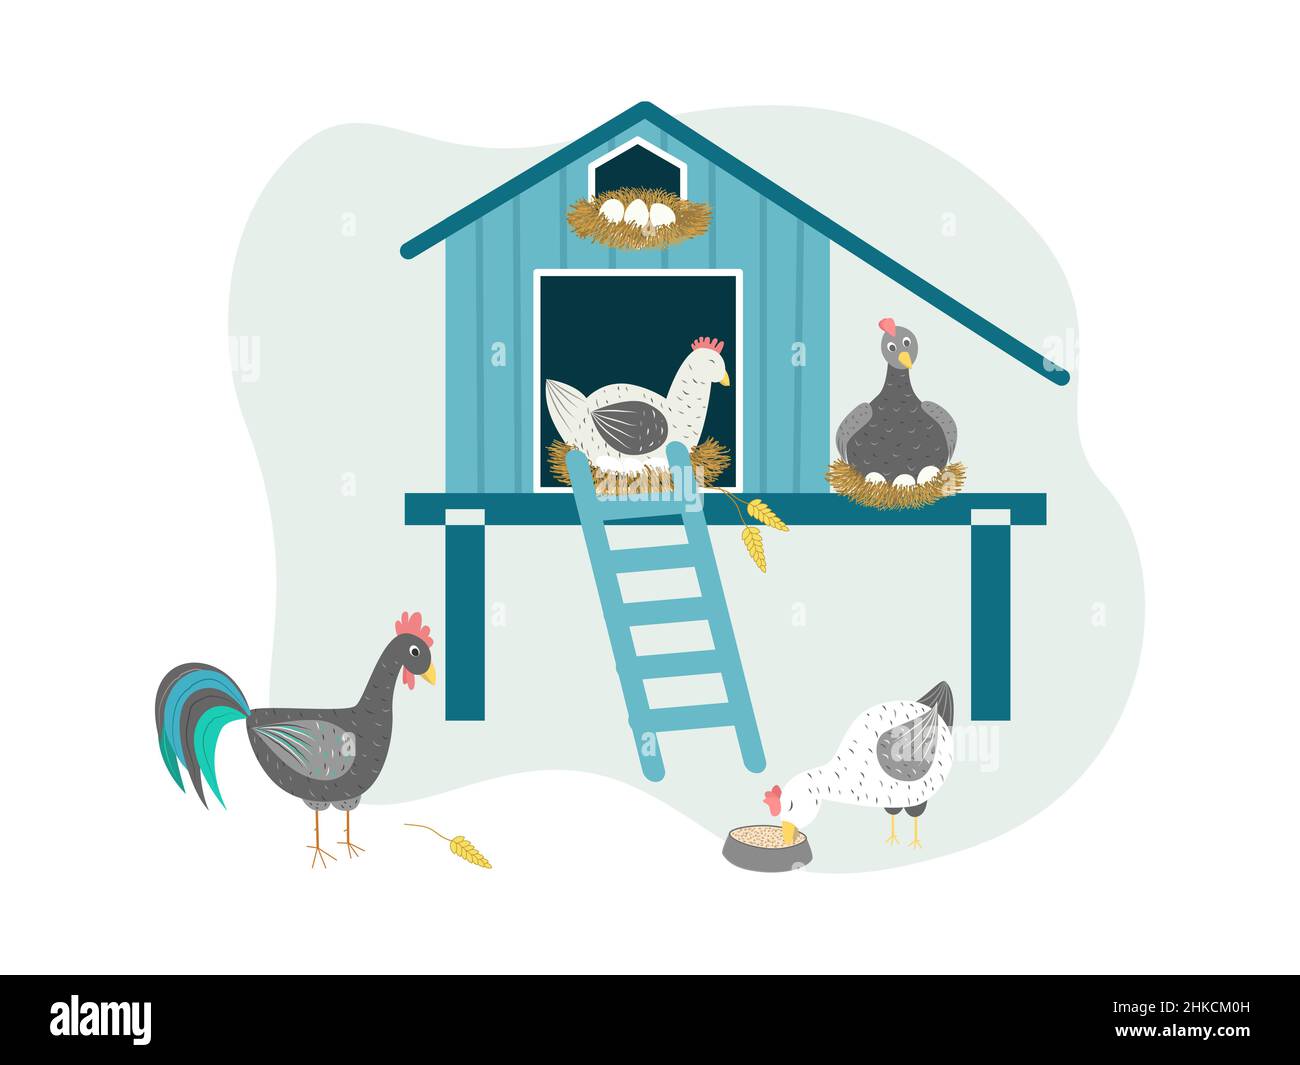 Chicken coop vector illustration. Characters of cute chickens that hatch eggs, a rooster in a chicken coop. Stock Vector